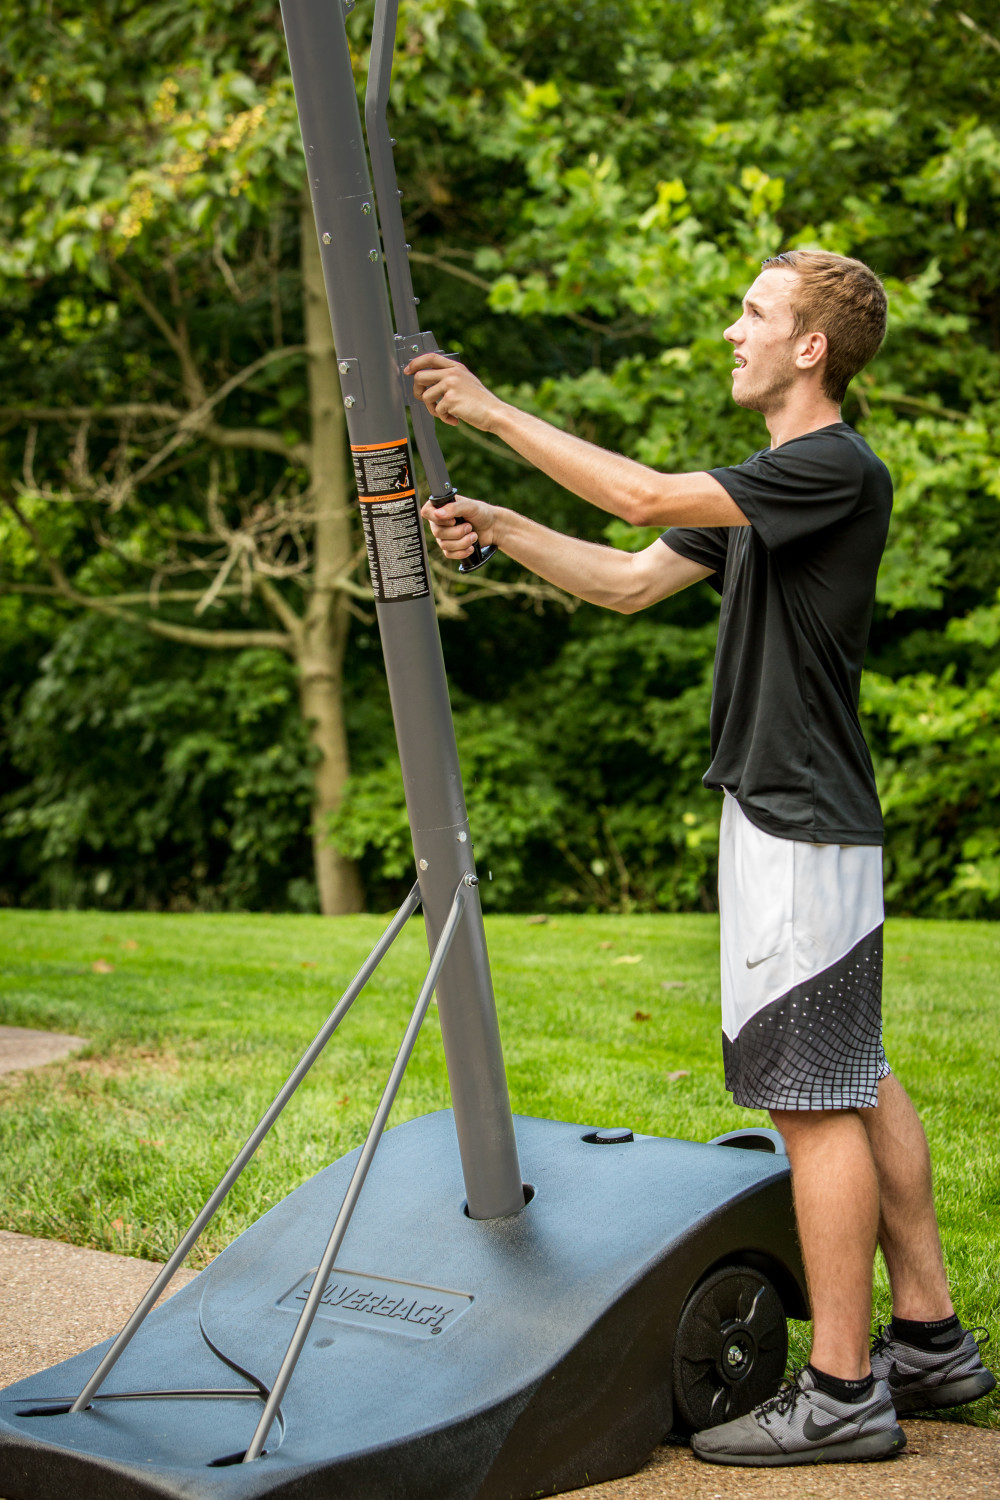 Silverback SBX 54 In. Backboard Portable Basketball Height-Adjustable Hoop System - image 4 of 8